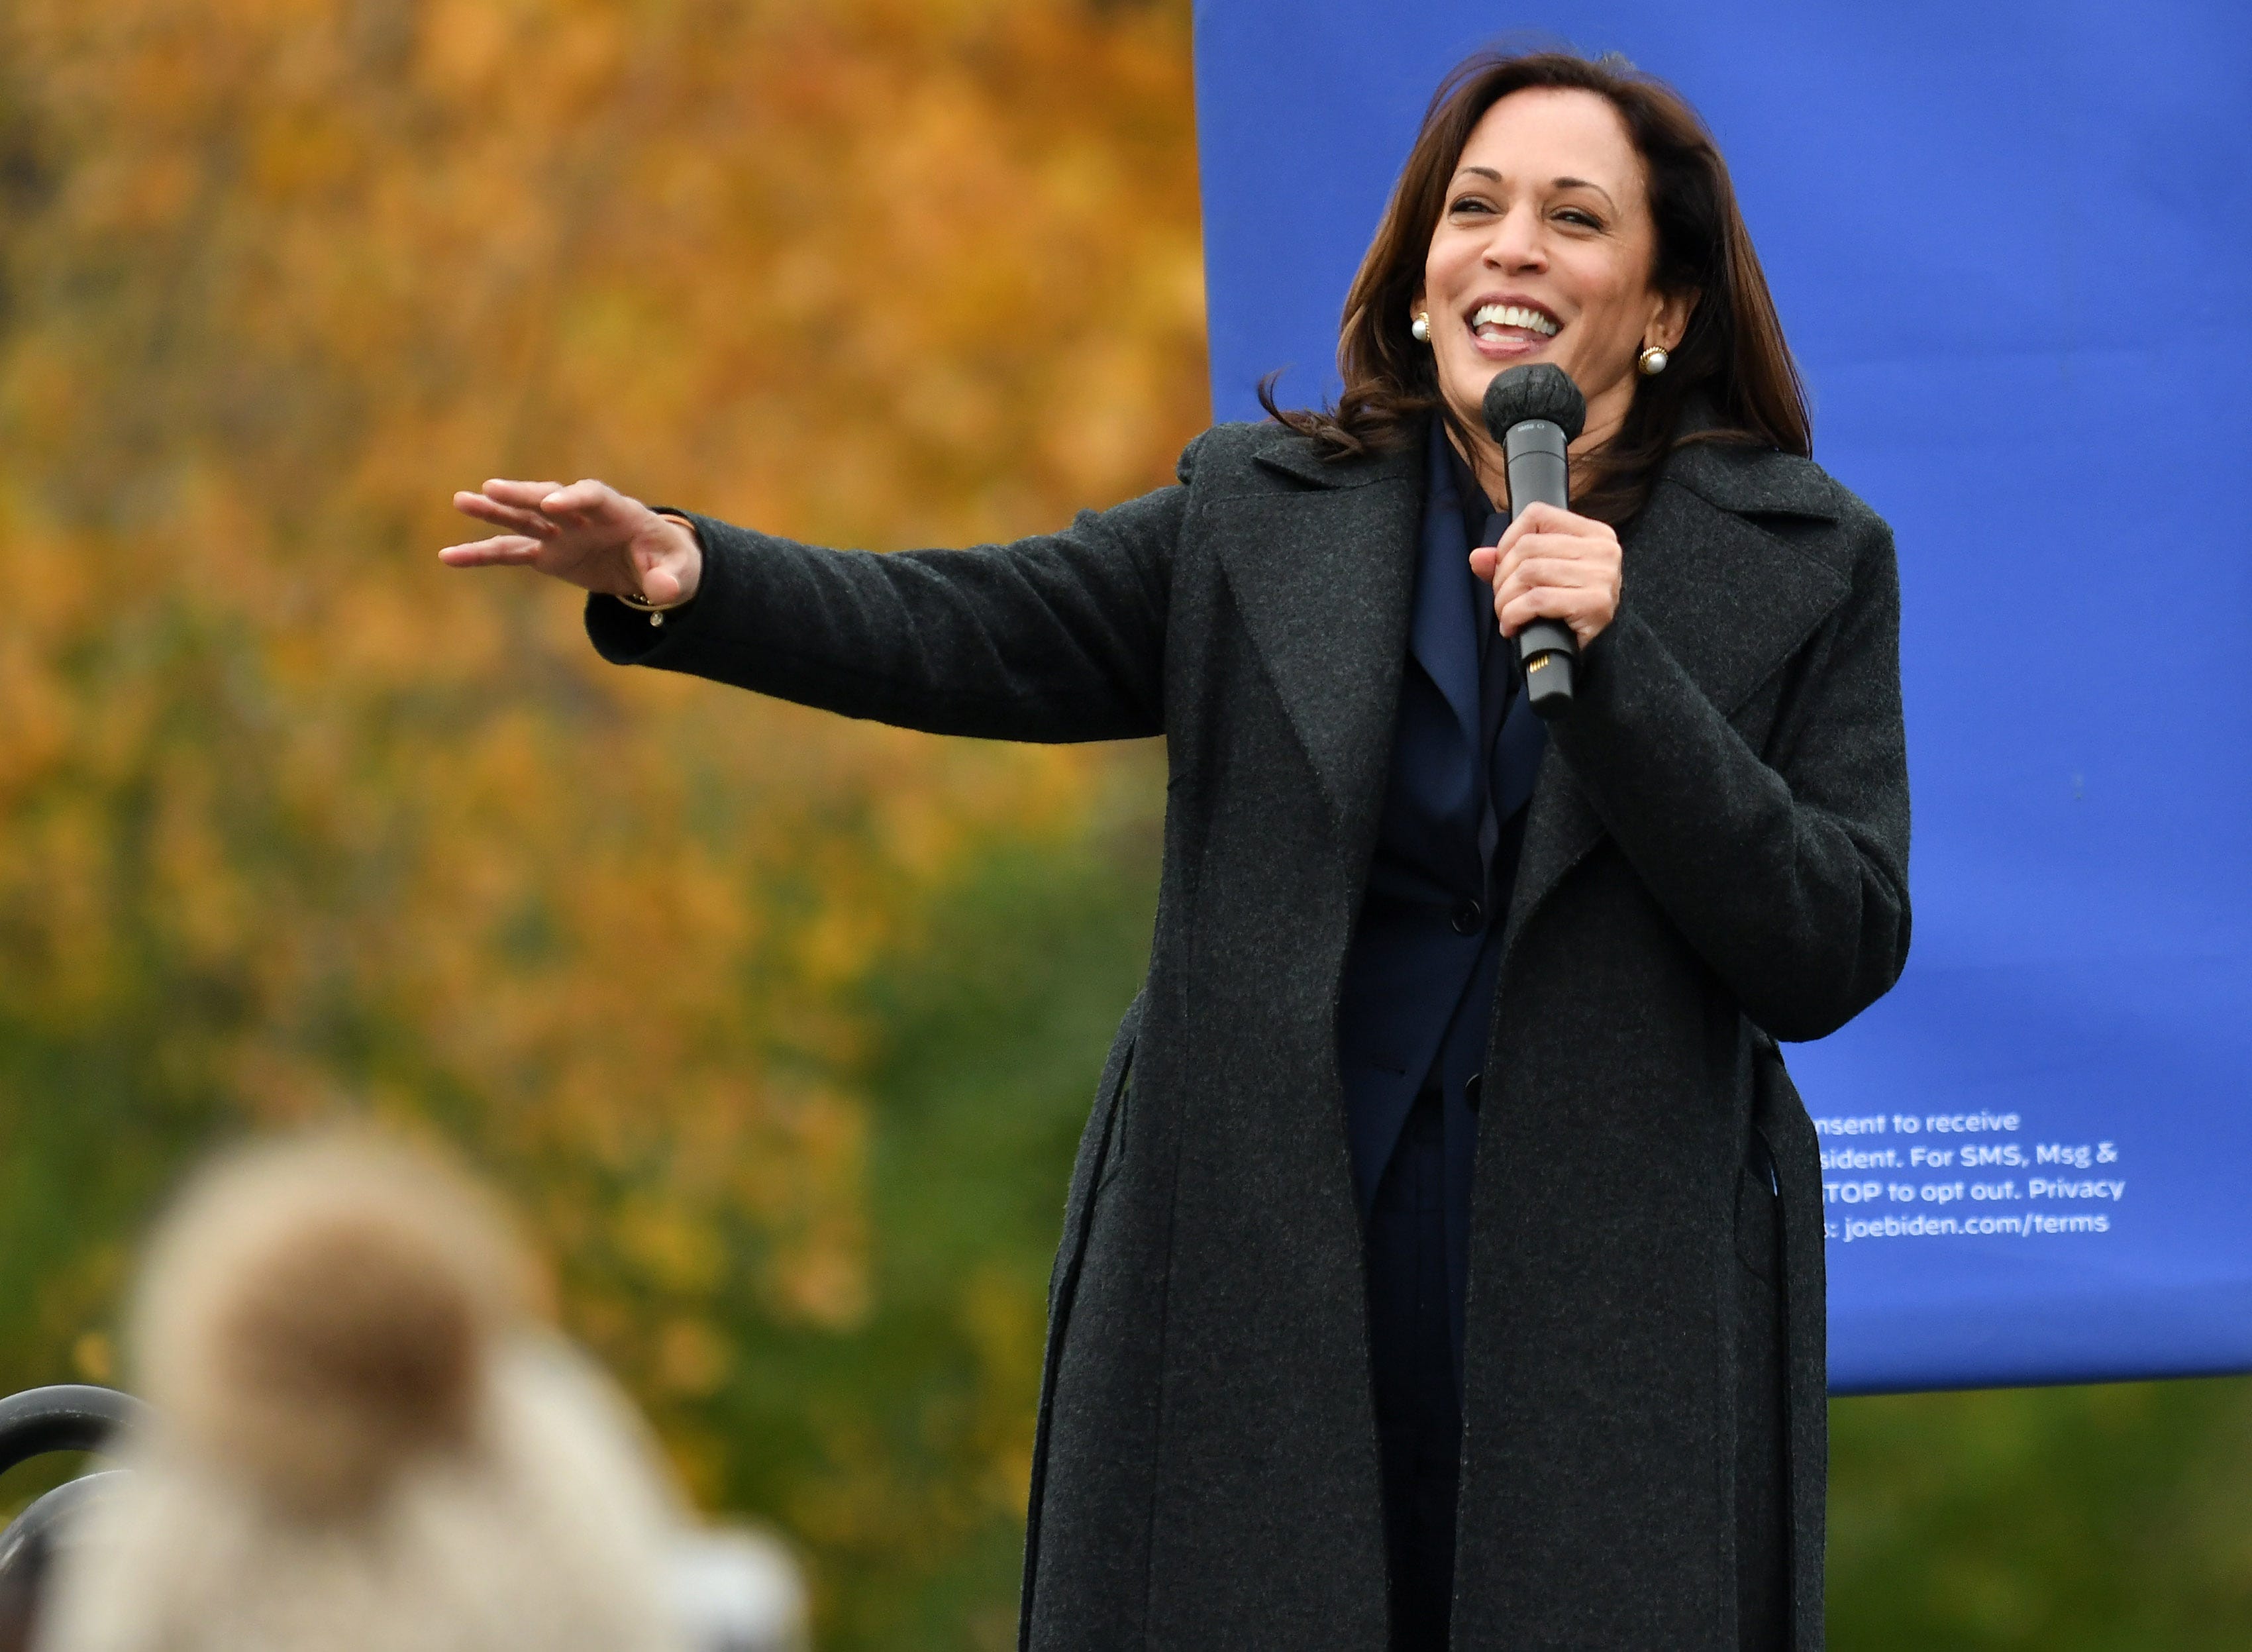 Democratic vice presidential candidate Sen. Kamala Harris speaks at the Canvass Kickoff event at the Troy Community Center in Troy, Mich. in Detroit on Oct. 25, 2020.